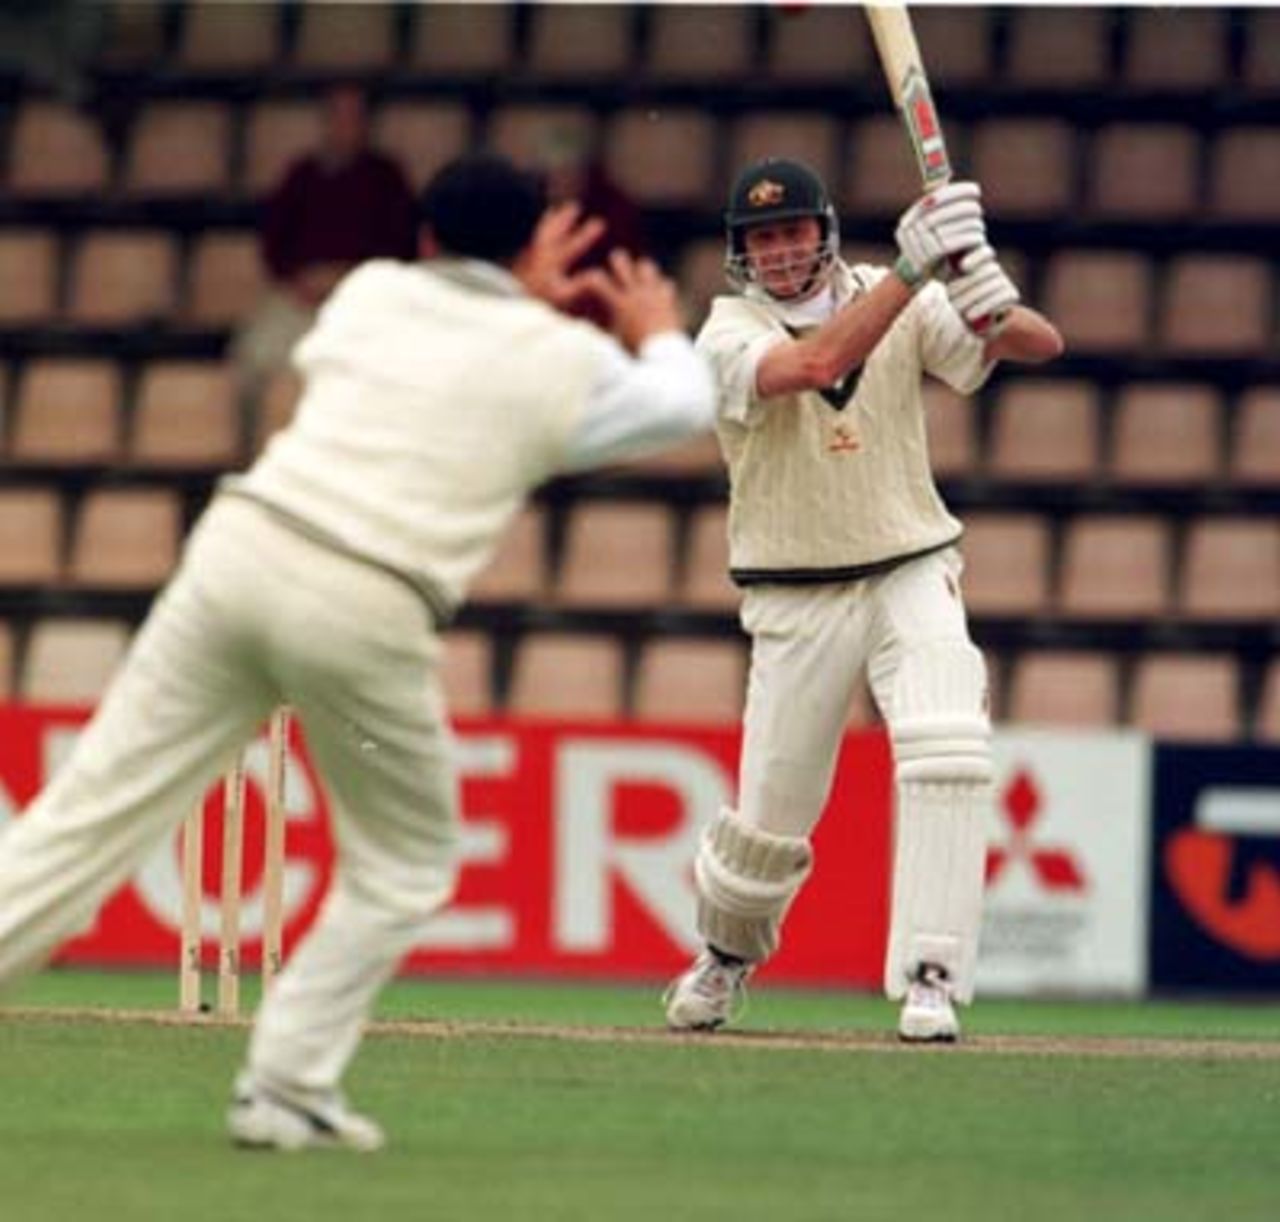 Paul Reiffel grimaces as Bryan Young moves to catch him out during the rain shortened 3rd day of the 3rd Test between Australia and New Zealand at Bellerive Oval in Hobart, Tasmania. November 29th 1997.